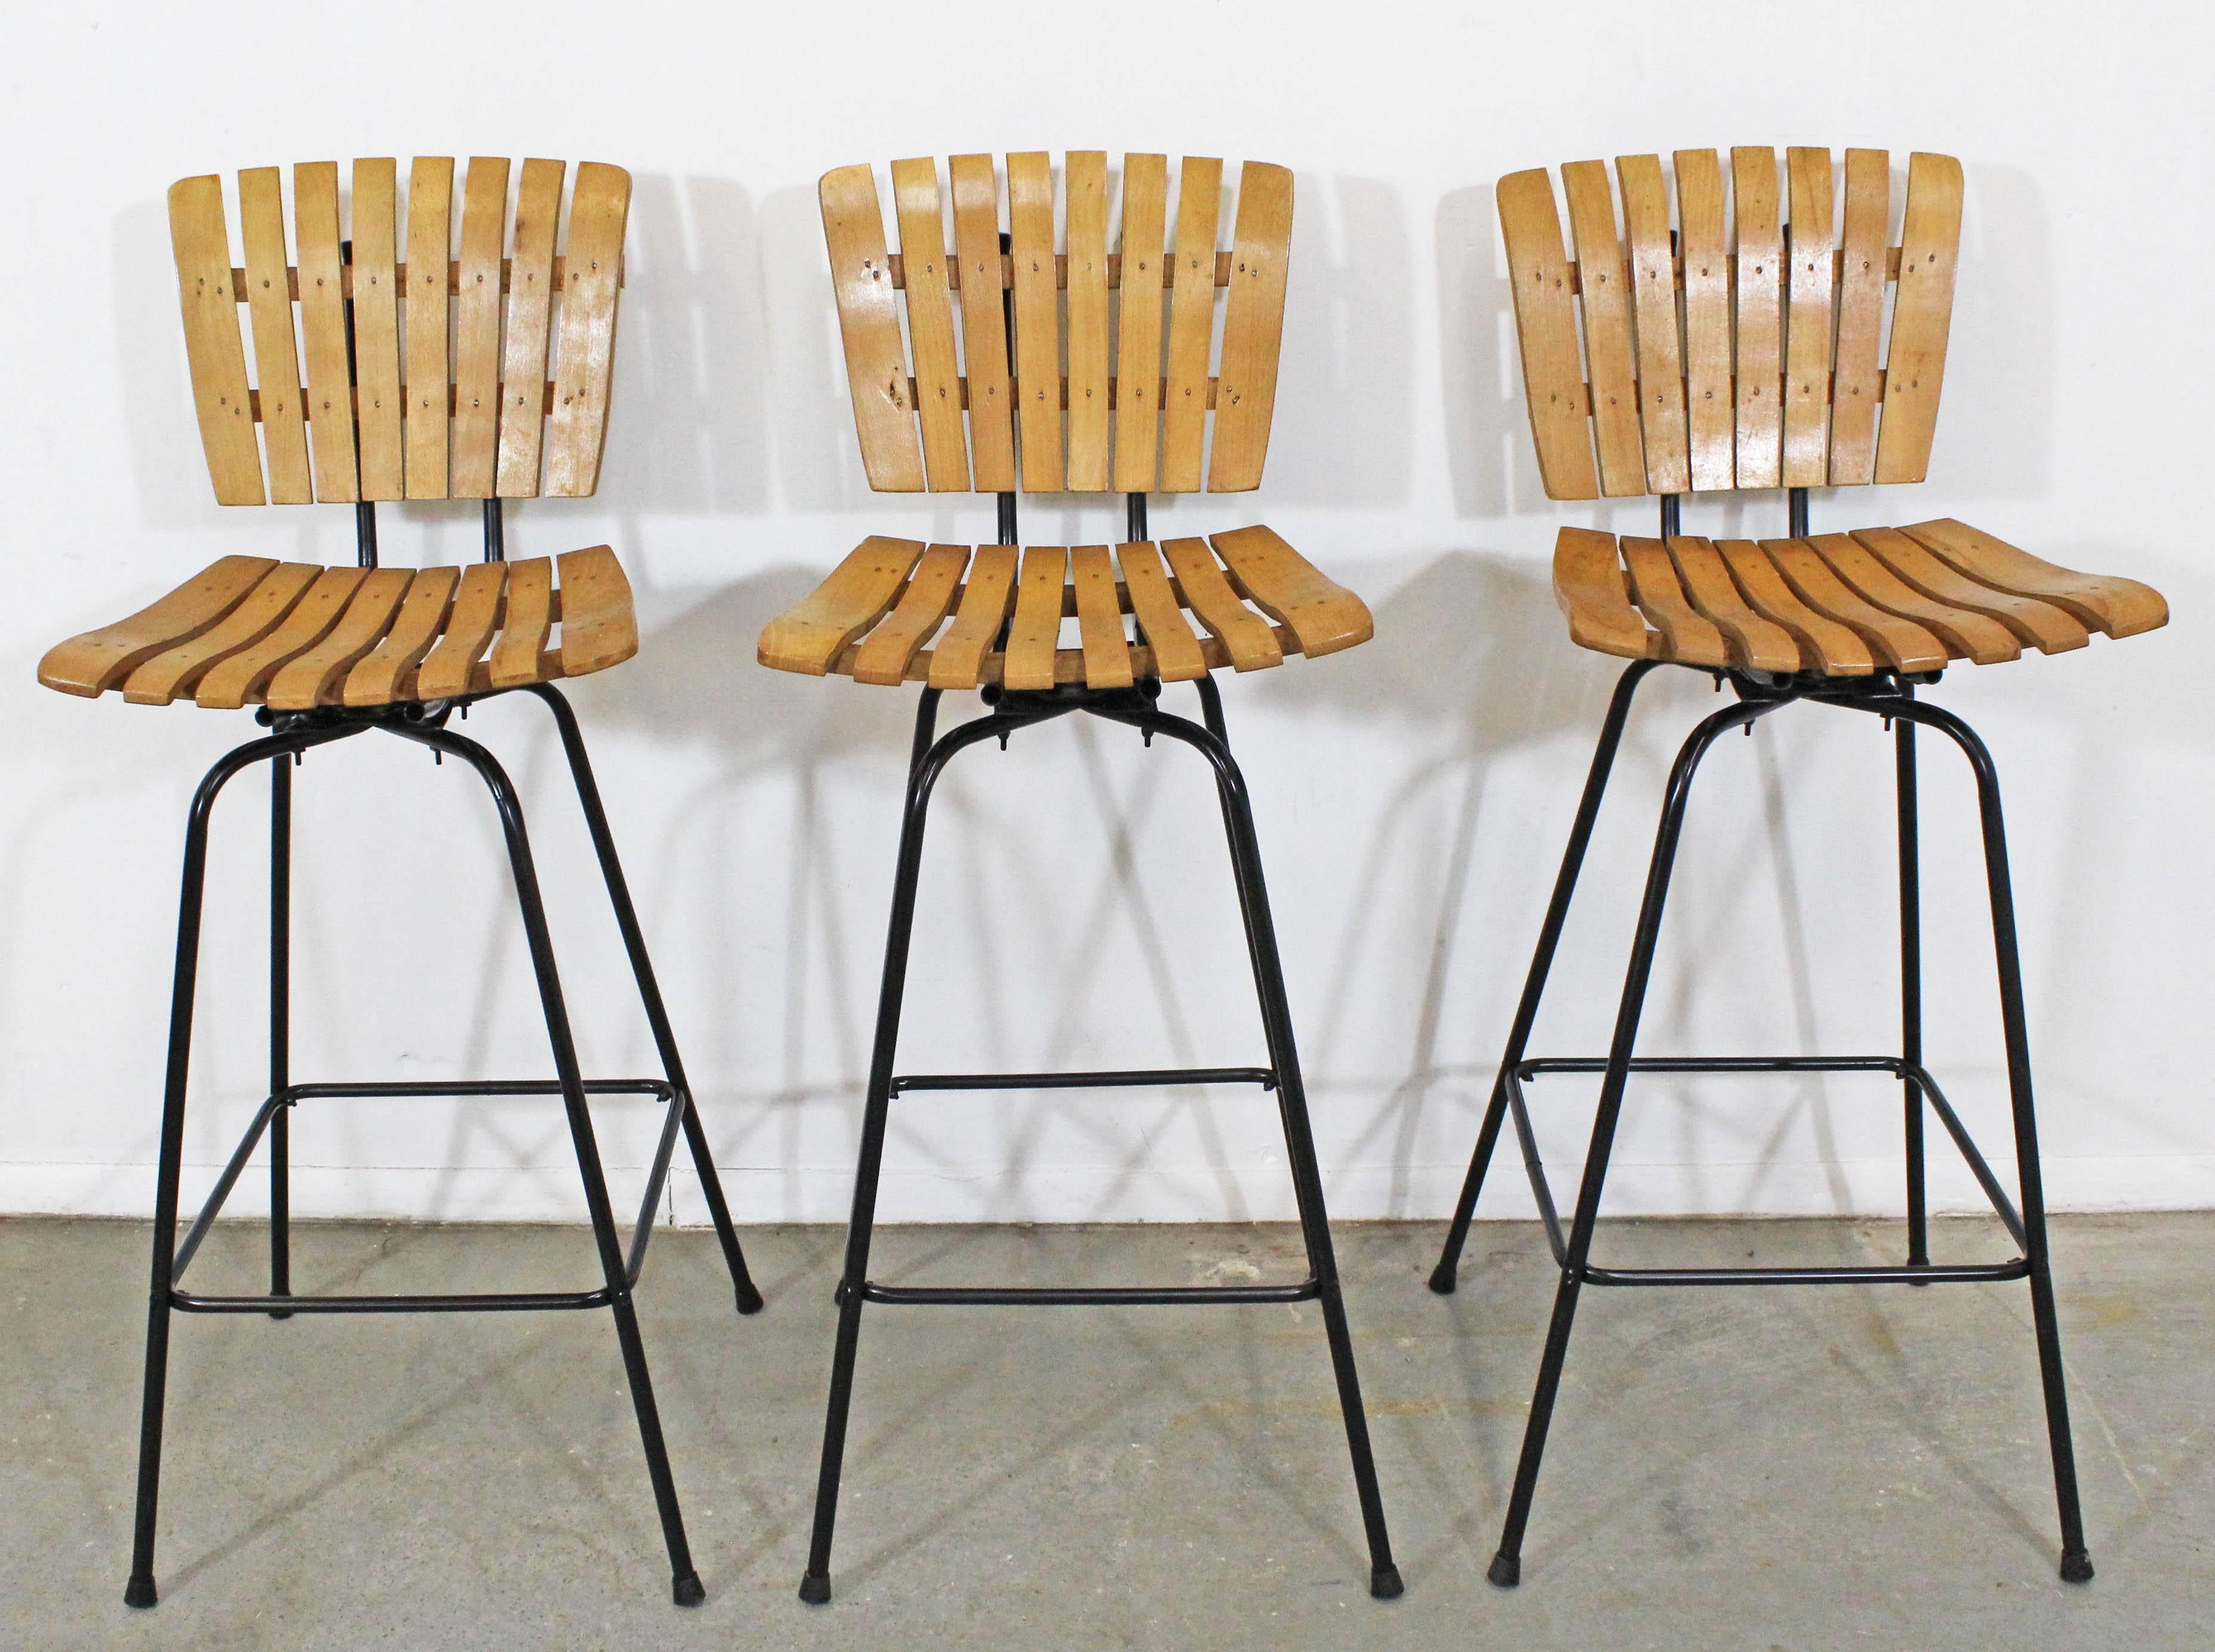 Offered is a set of 3 Umanoff style slat bar stools that swivel. The stools are in good condition for their age, showing some wear (see photos) with repainted bases and new foot cups. They are not signed.

Approximate dimensions:
17